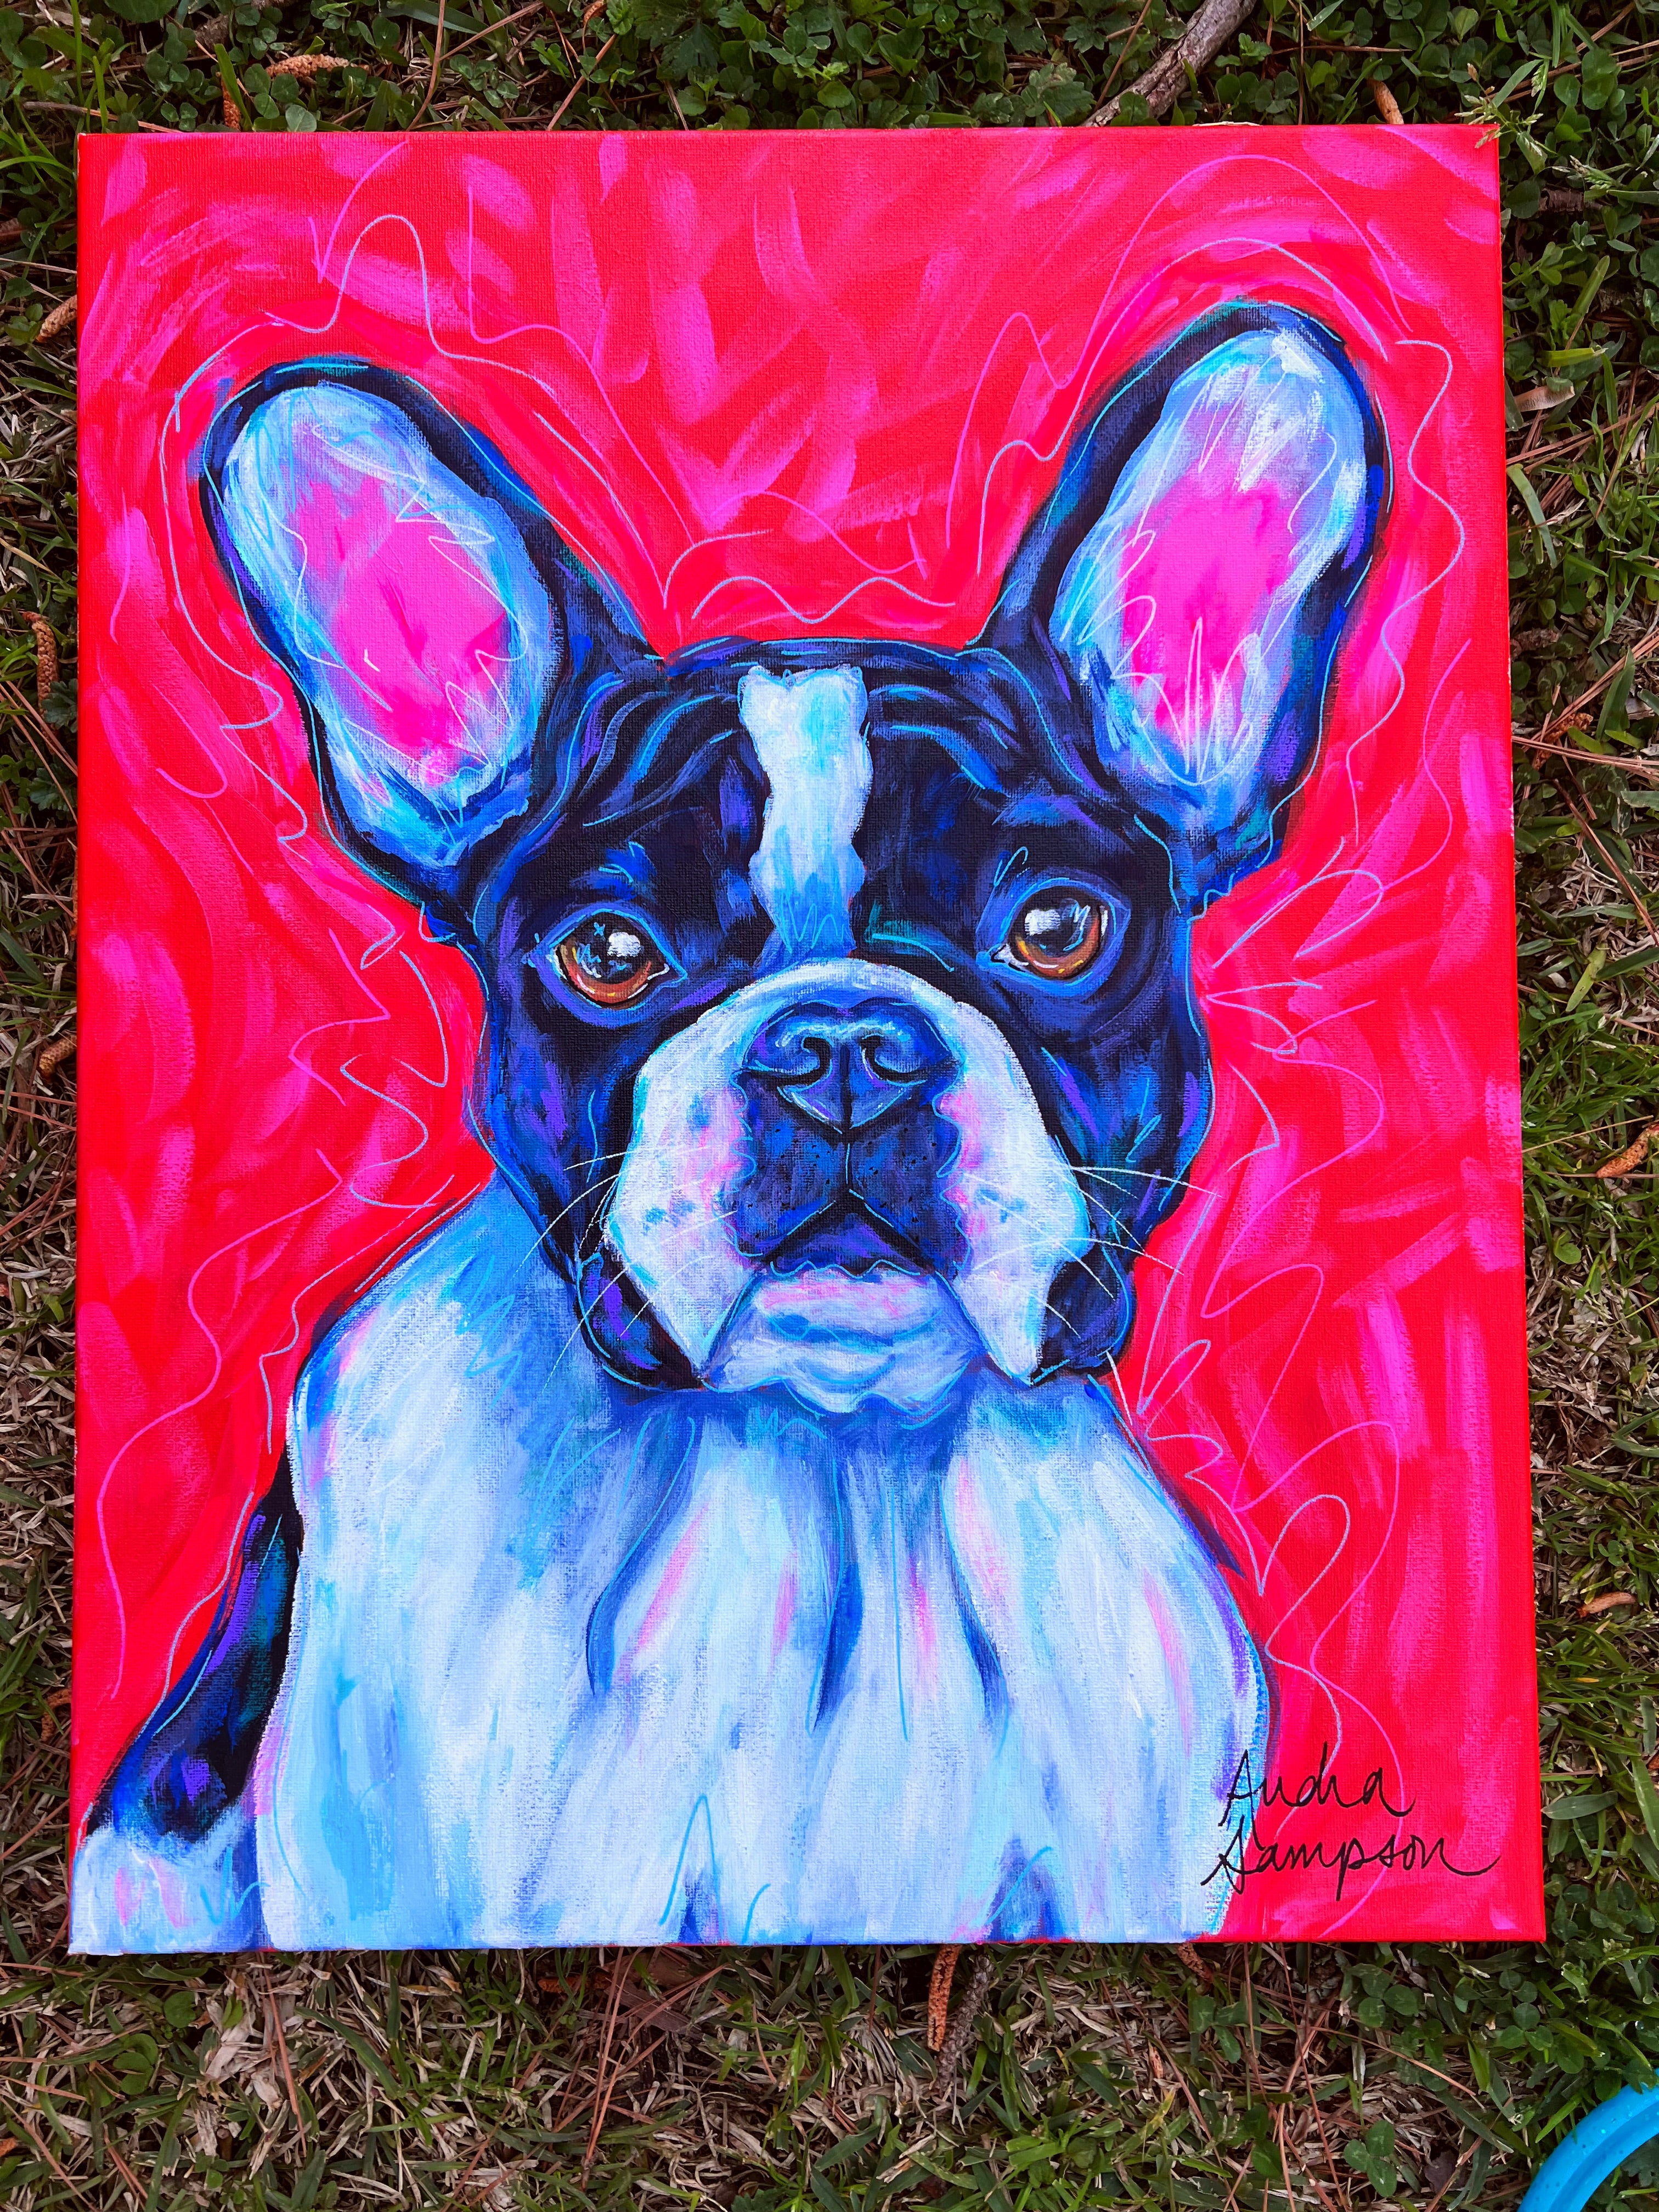 Black and White French Bulldog Original Painting on 16x20 Canvas